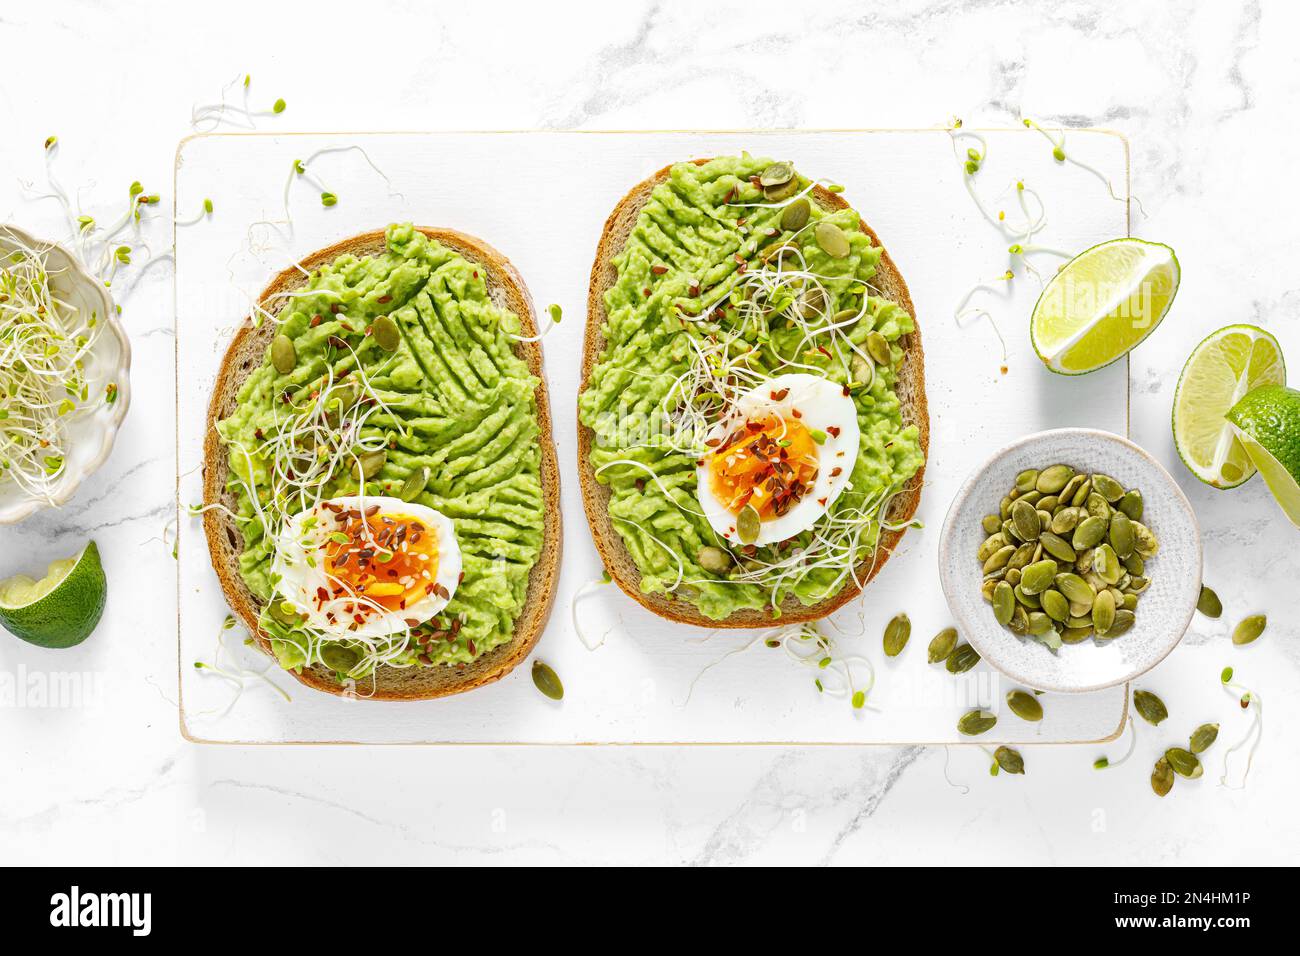 Avocado toast with boiled egg, seeds and sprouts on white background. Healthy diet food. Top view Stock Photo